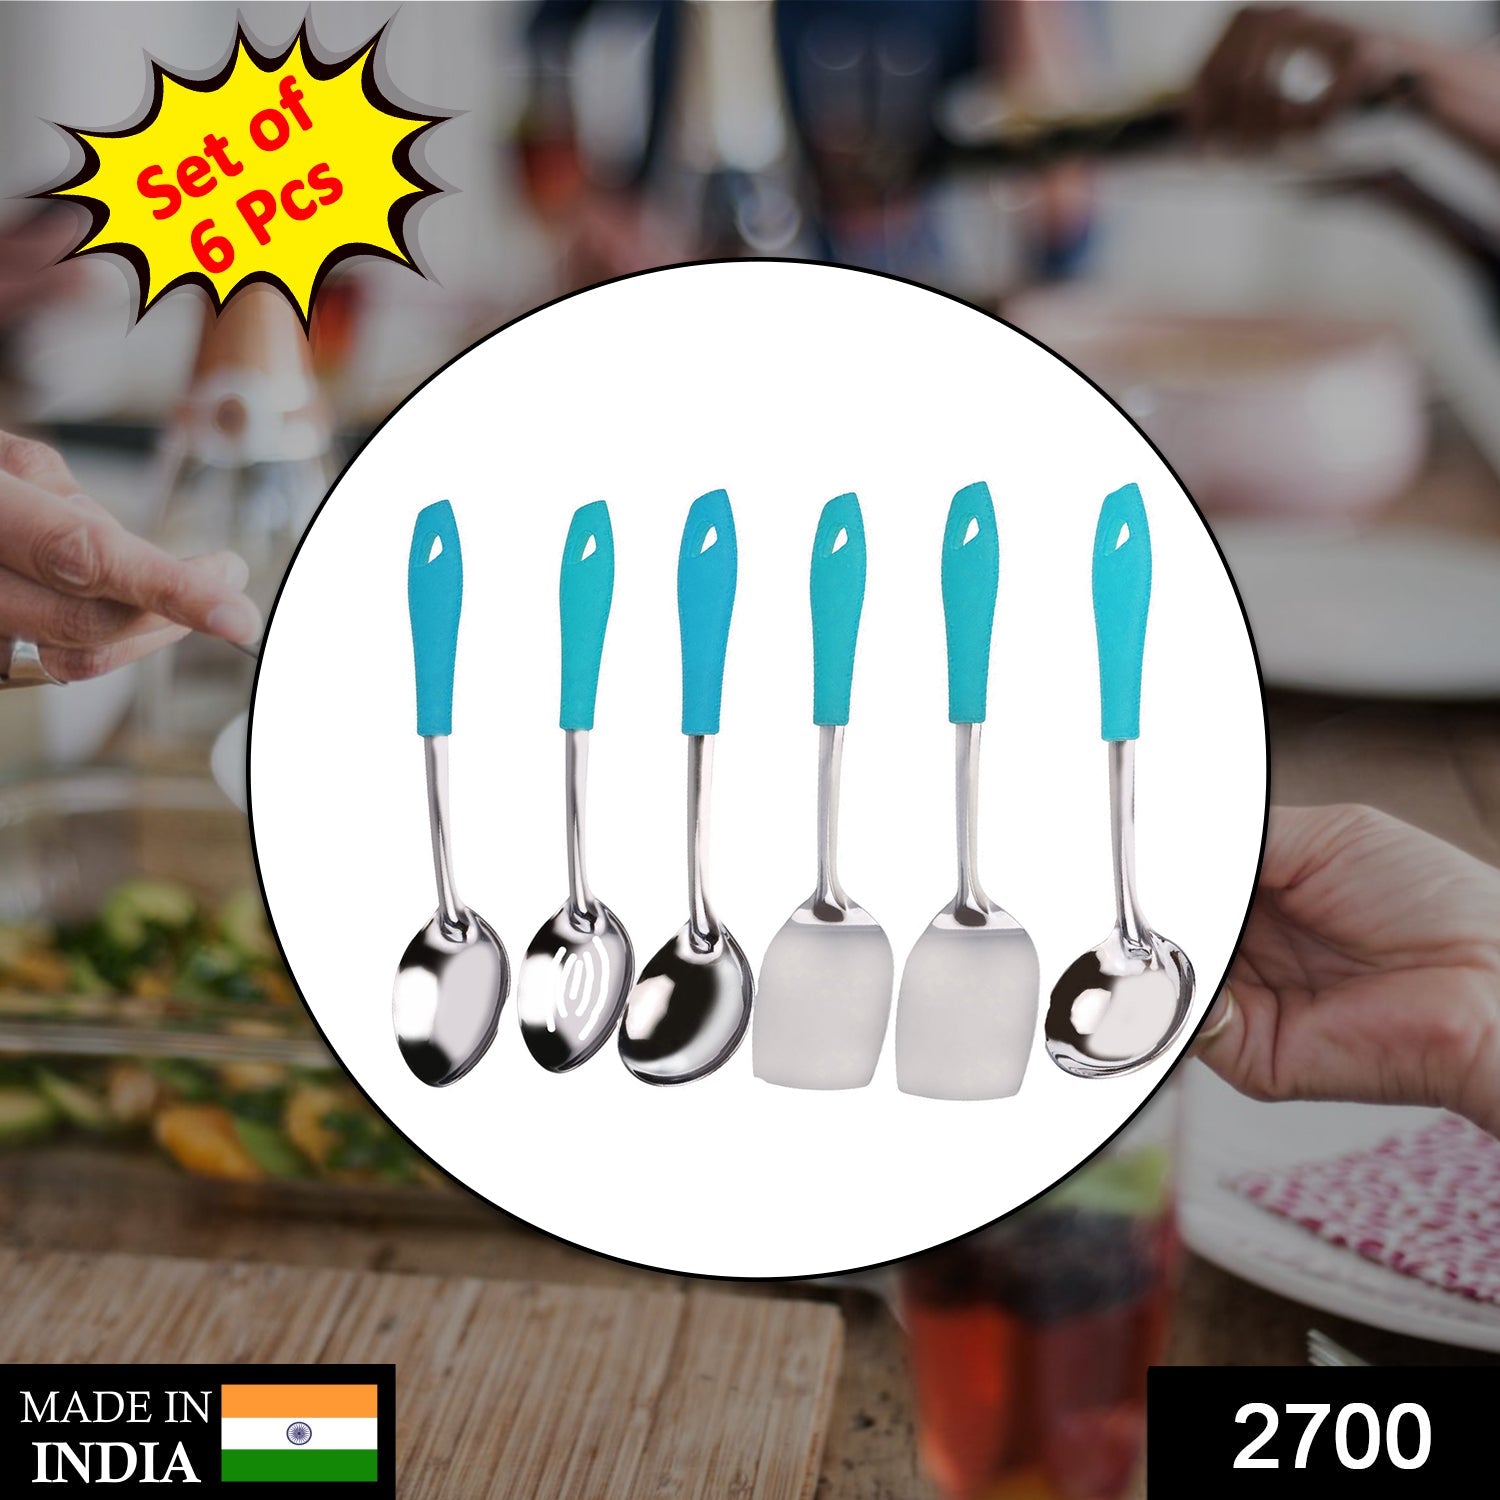 2700 6 Pc SS Serving Spoon used in all kinds of household and kitchen places for serving eating food etc.